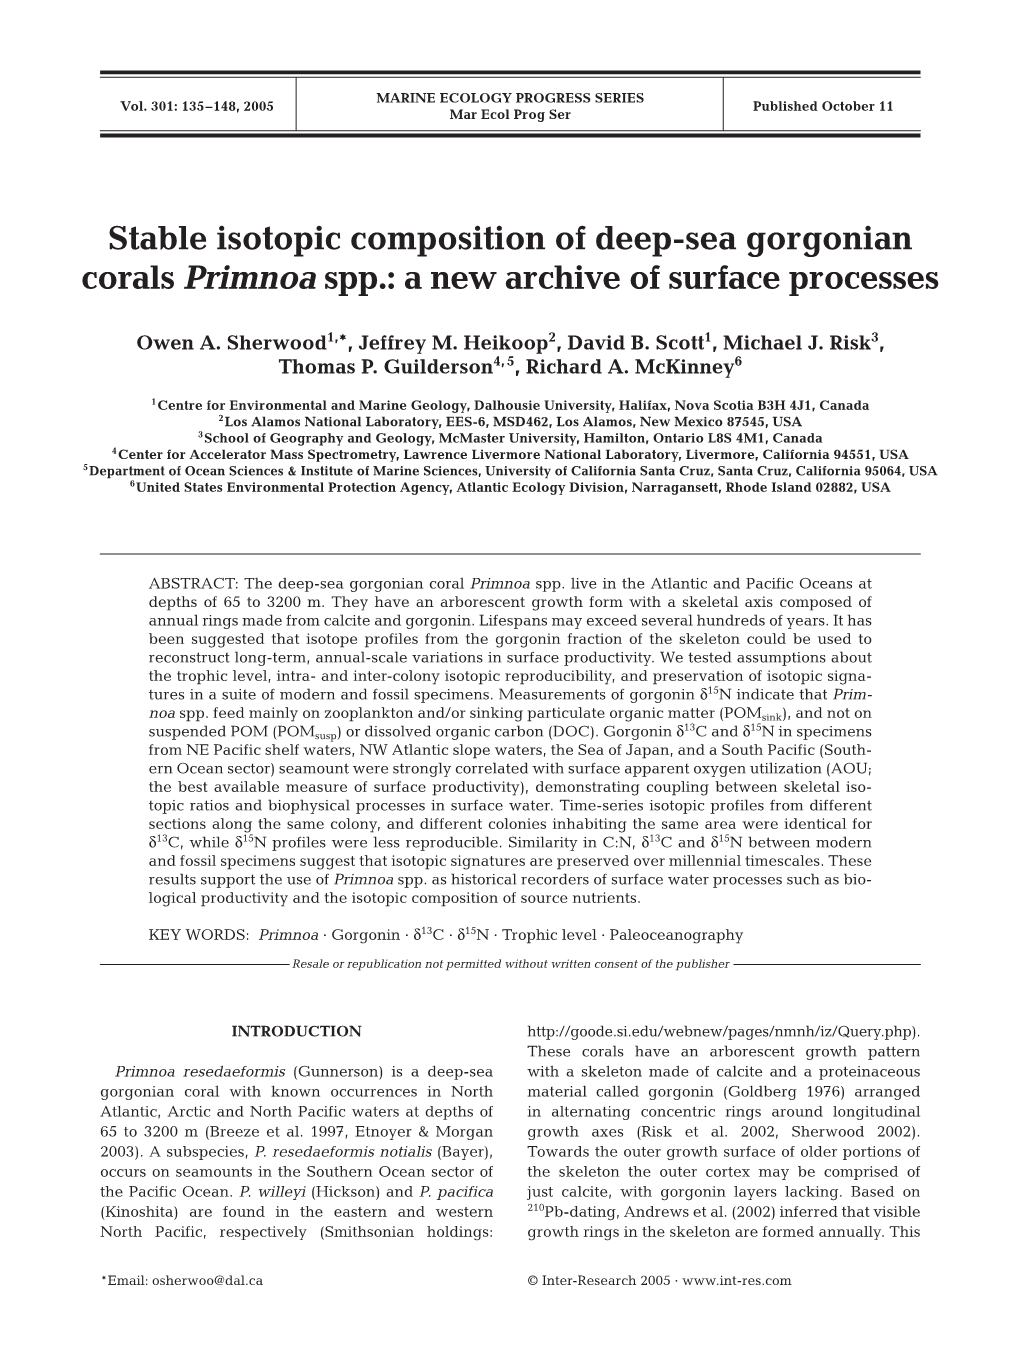 Stable Isotopic Composition of Deep-Sea Gorgonian Corals Primnoa Spp.: a New Archive of Surface Processes